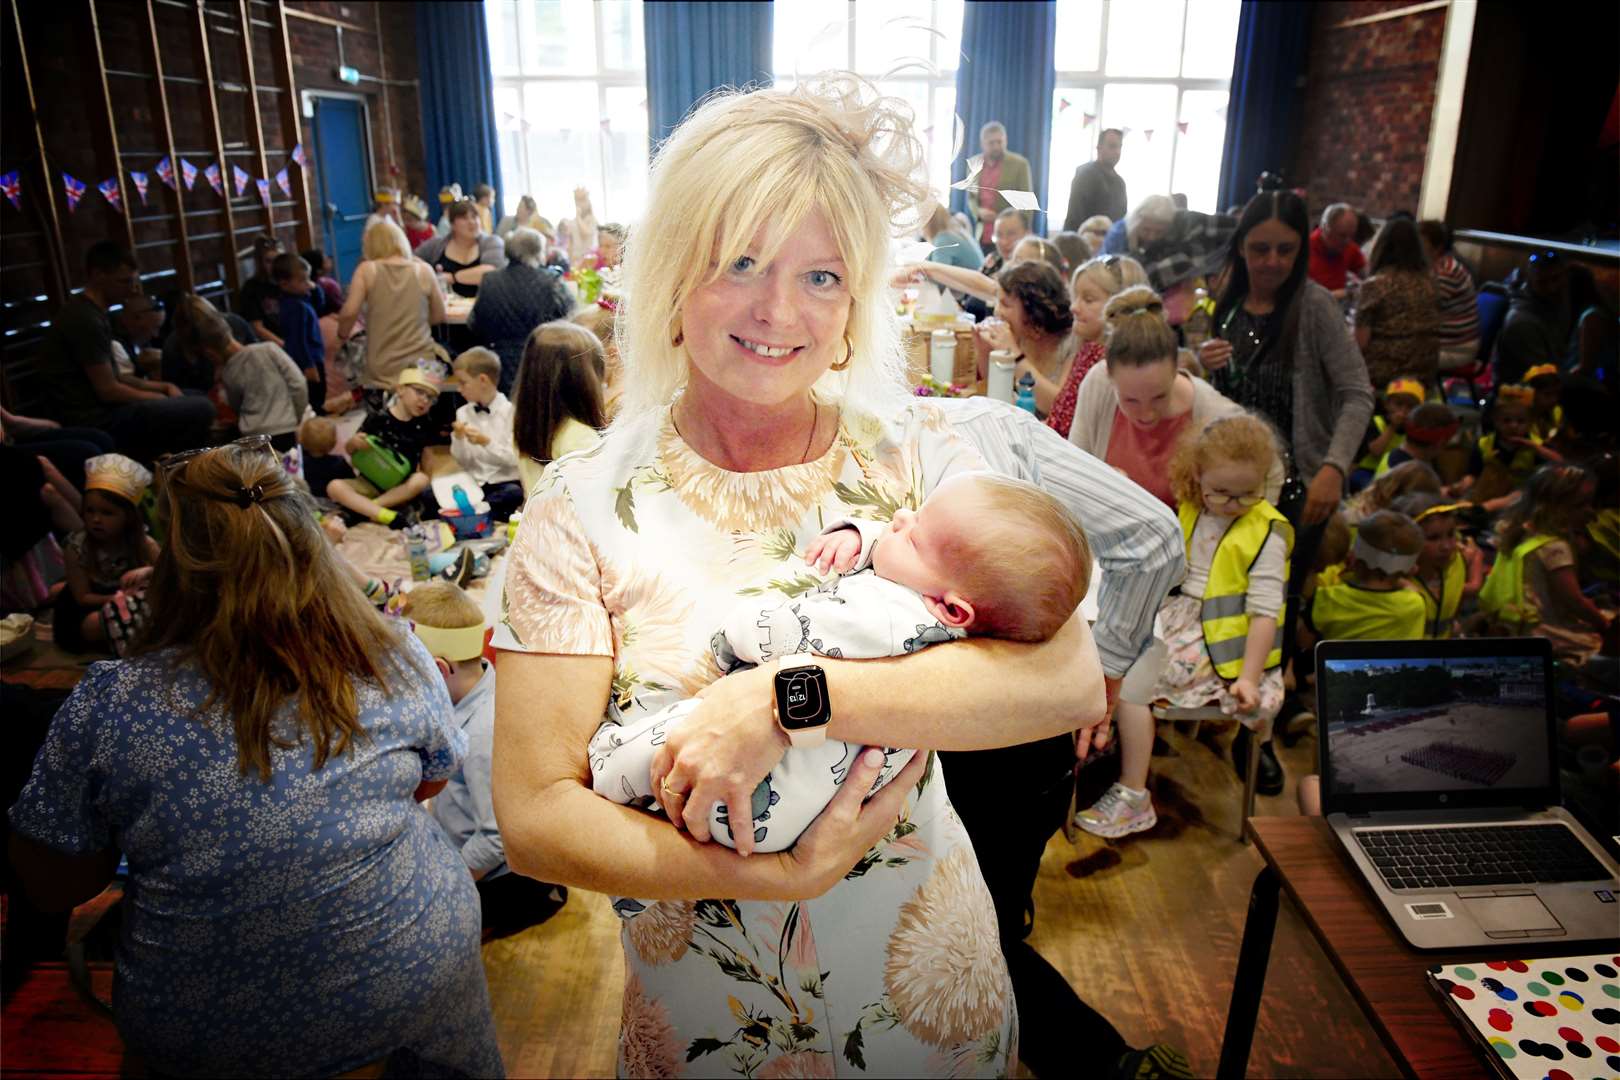 Tracy Sinclair with the youngest attendee, David Berkenheger, who is one month old. Picture: James Mackenzie